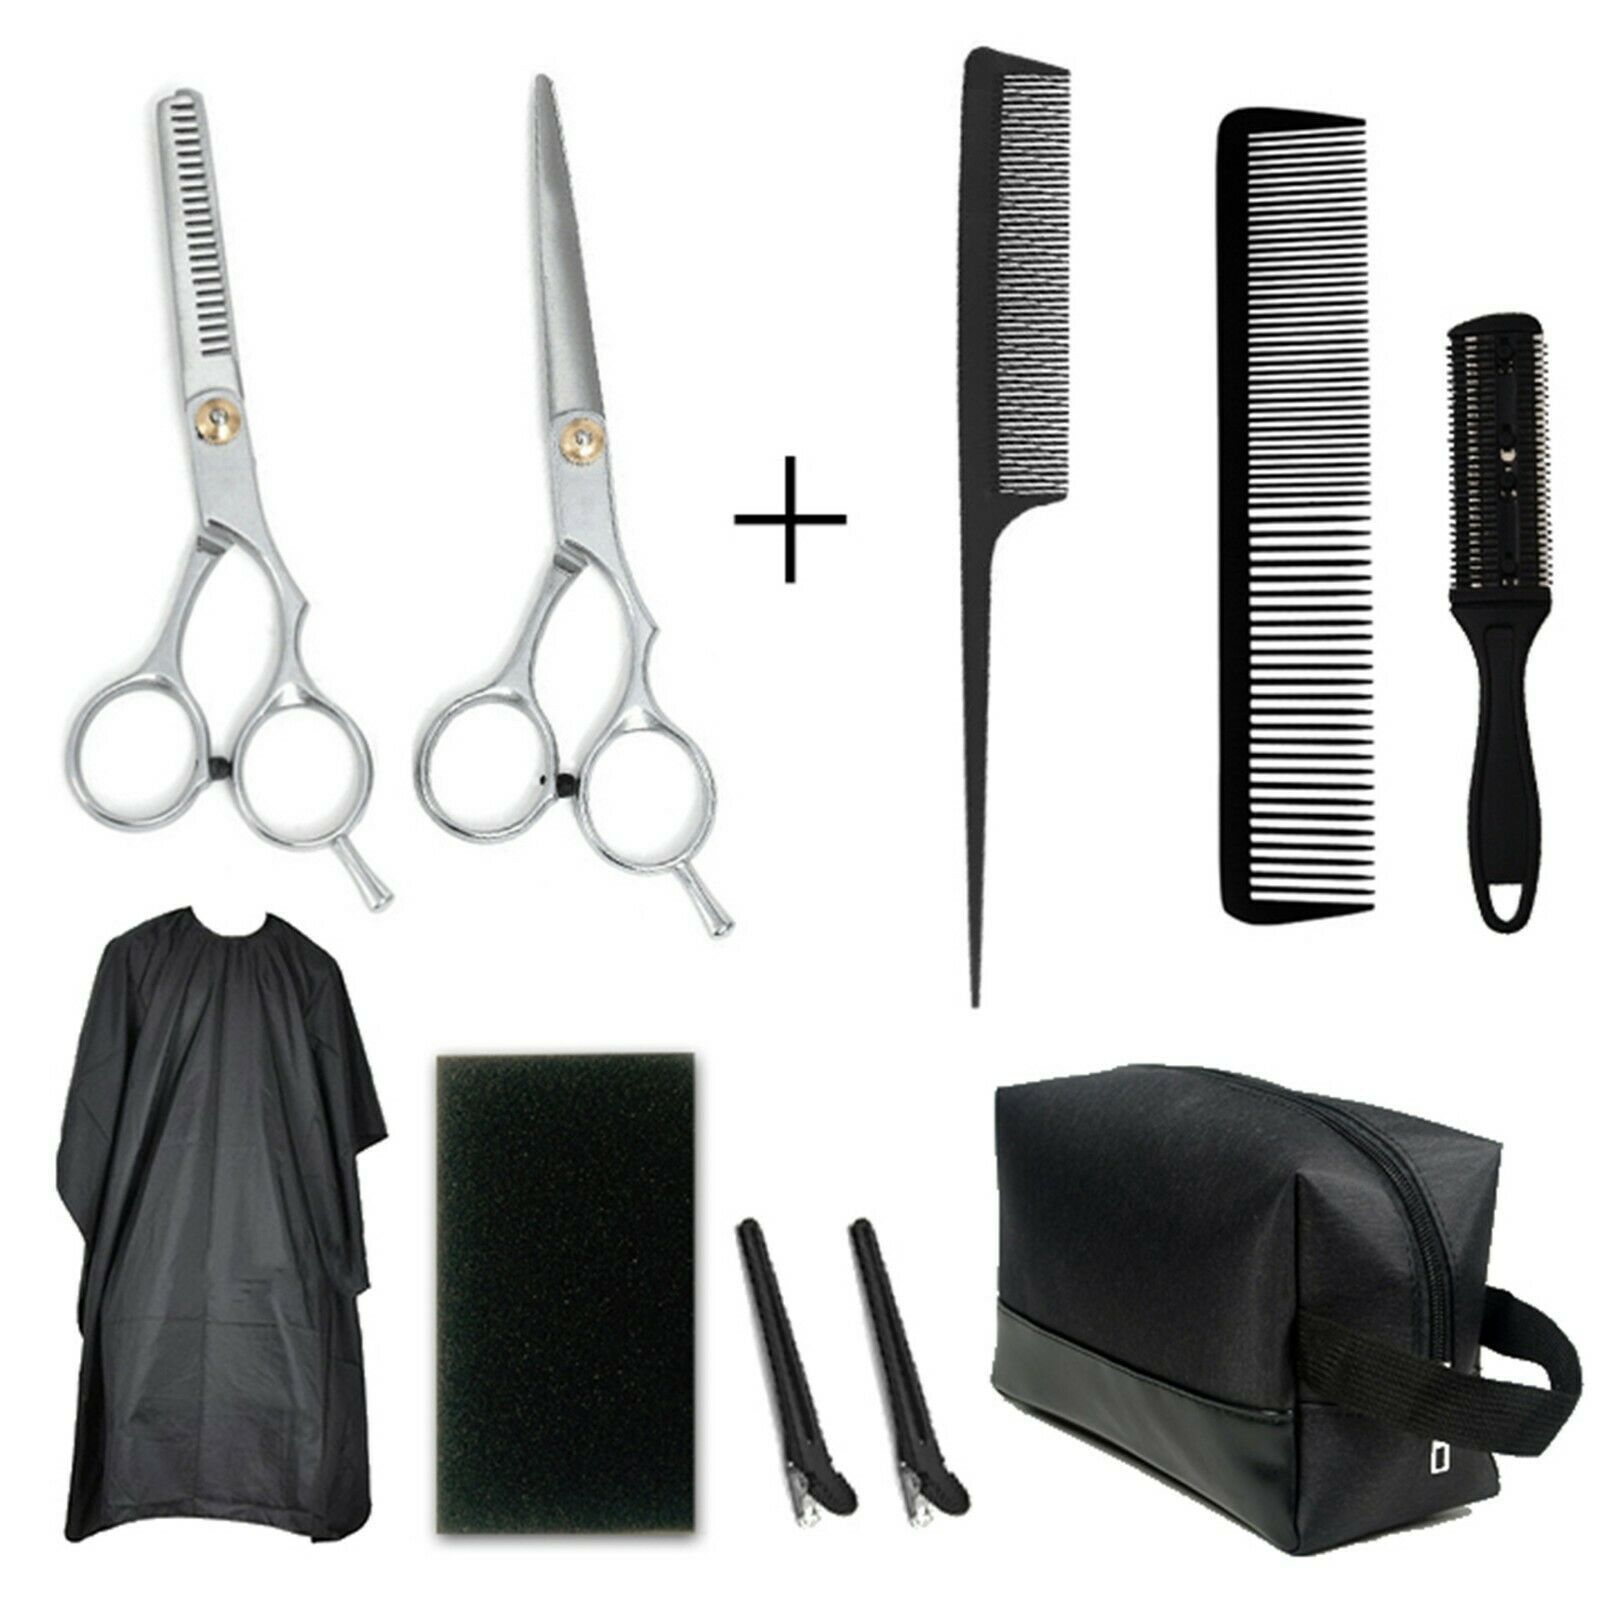 10 Pcs Professional Barber Clippers, Hair Cutting Thinning Shears, Scissors Kit